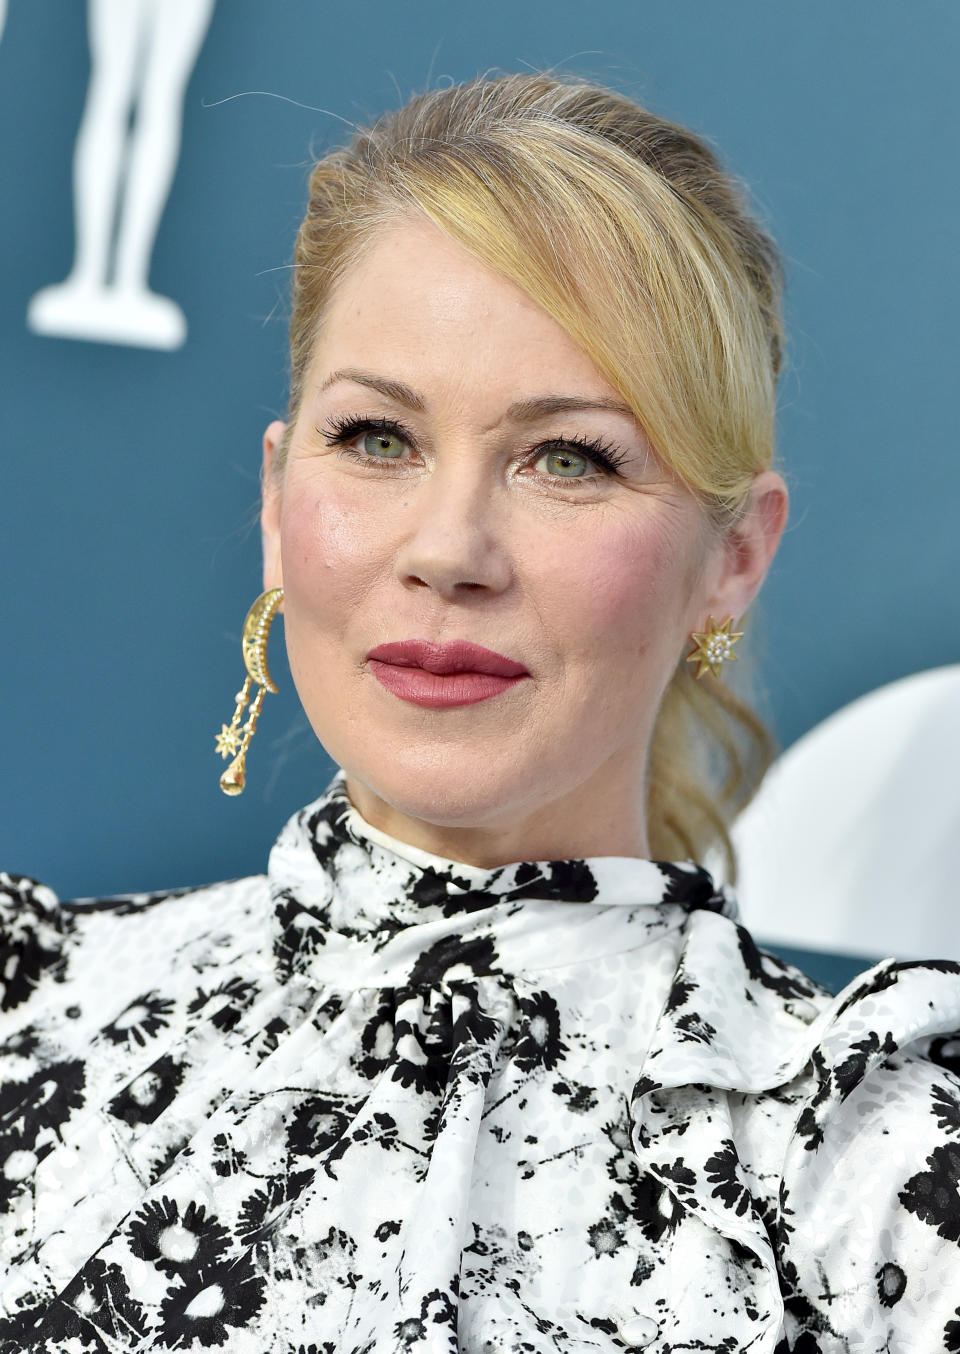 Christina Applegate wearing a patterned blouse with ruffled collar and gold earrings